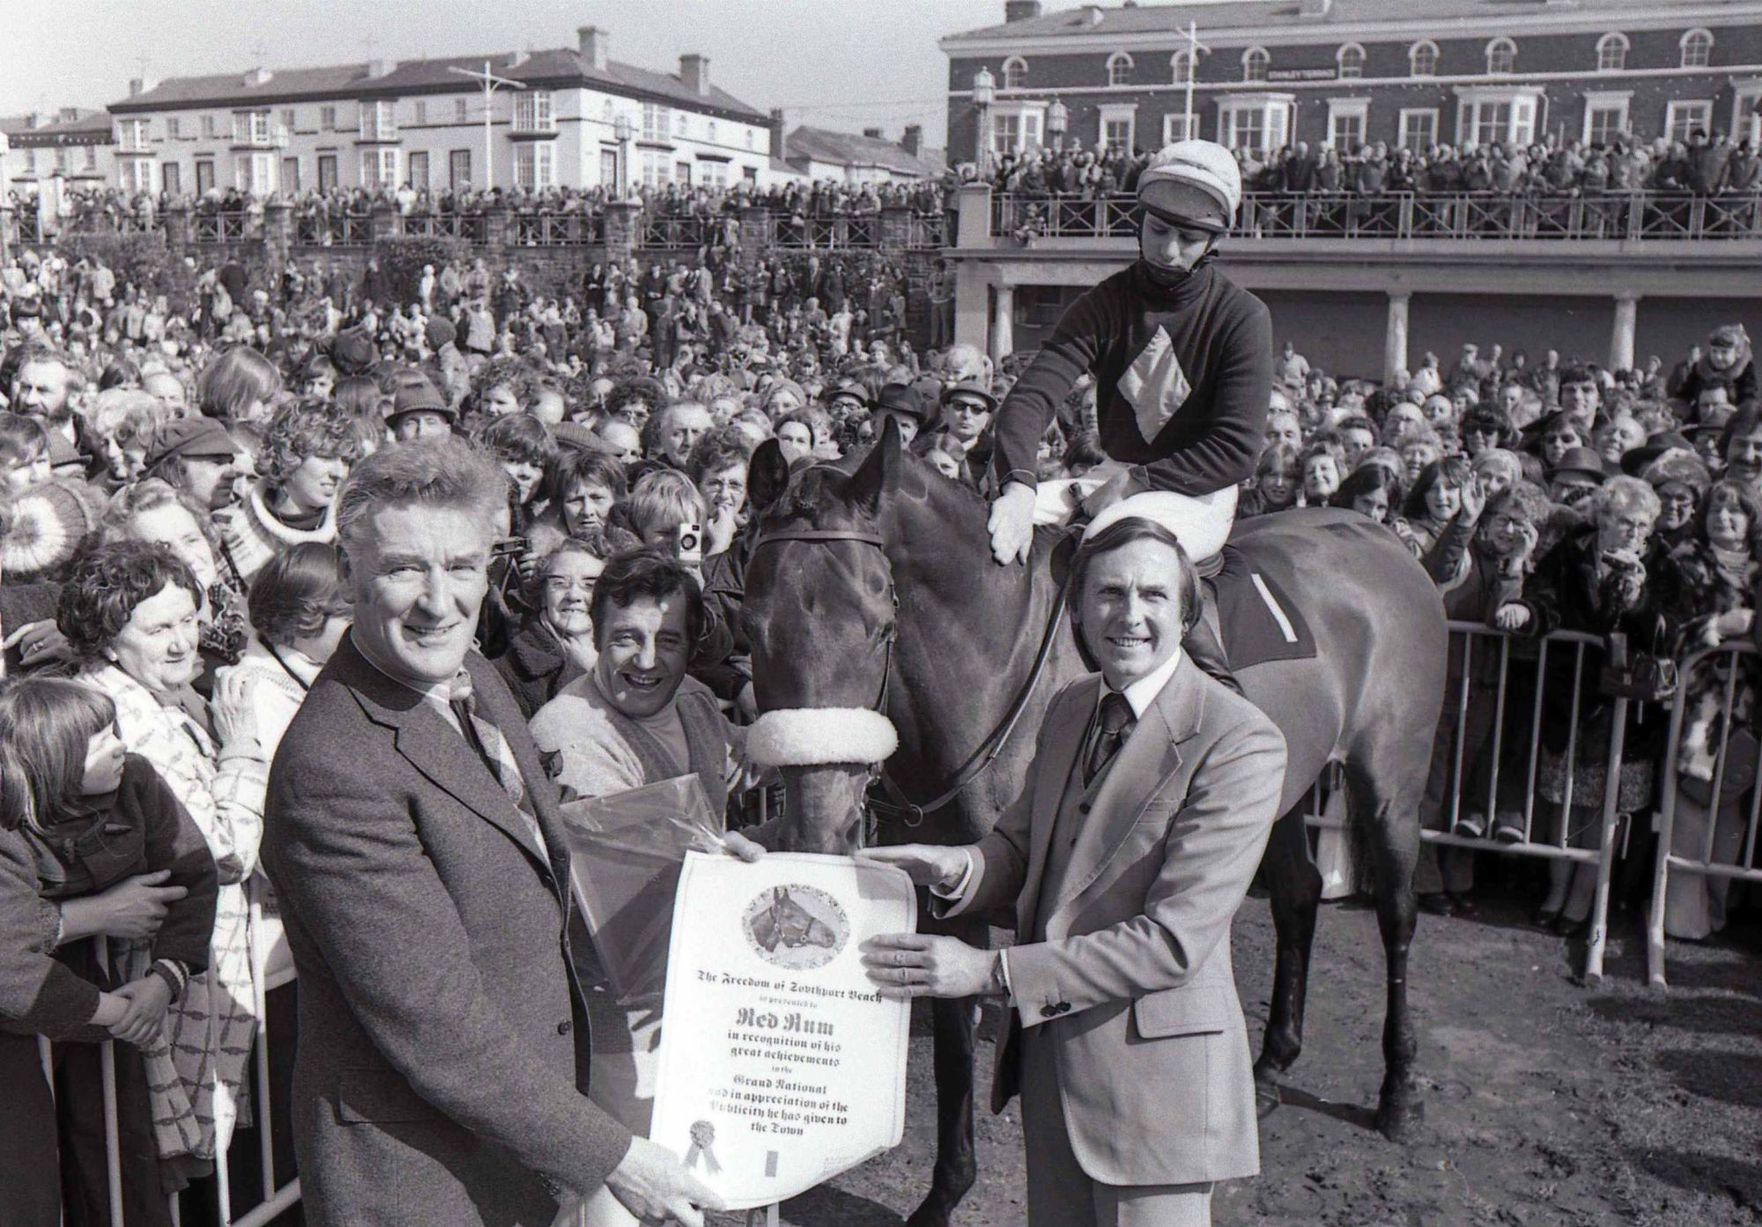 Red Rum with Ginger McCain recieve the freedom of Southport Sands in recognition of their achievements in promoting Southport 1978